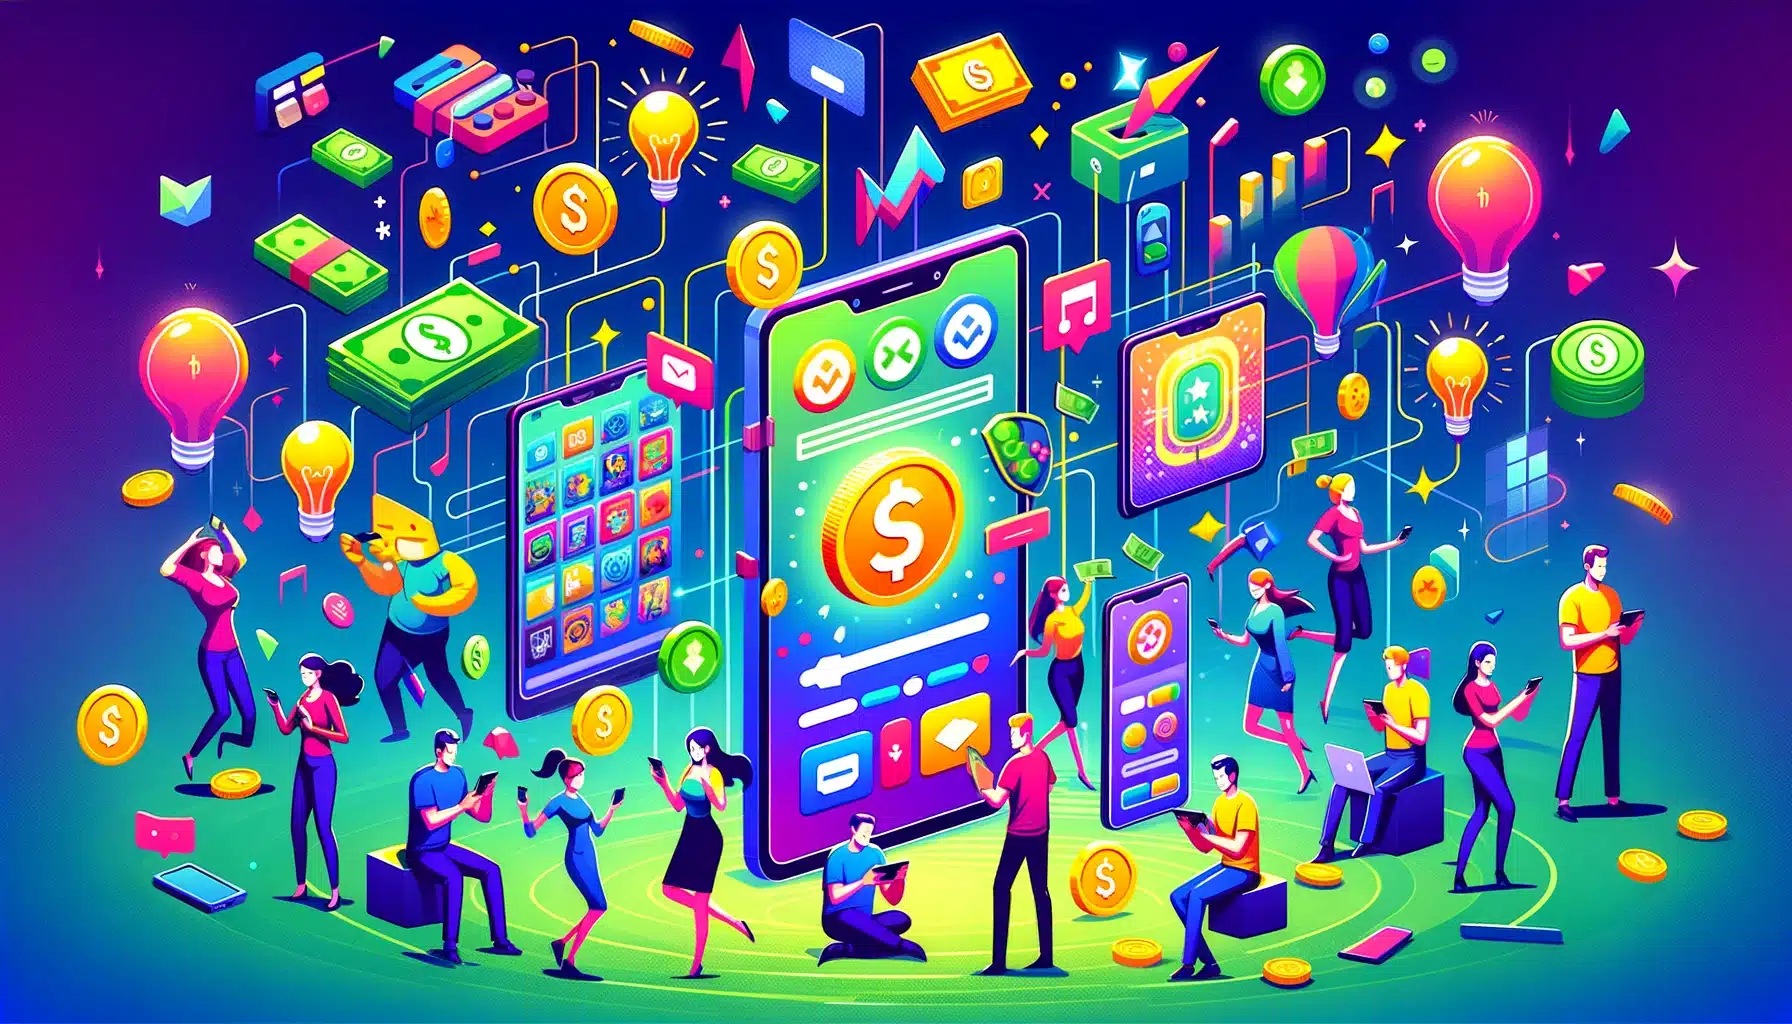 Game apps that can earn money